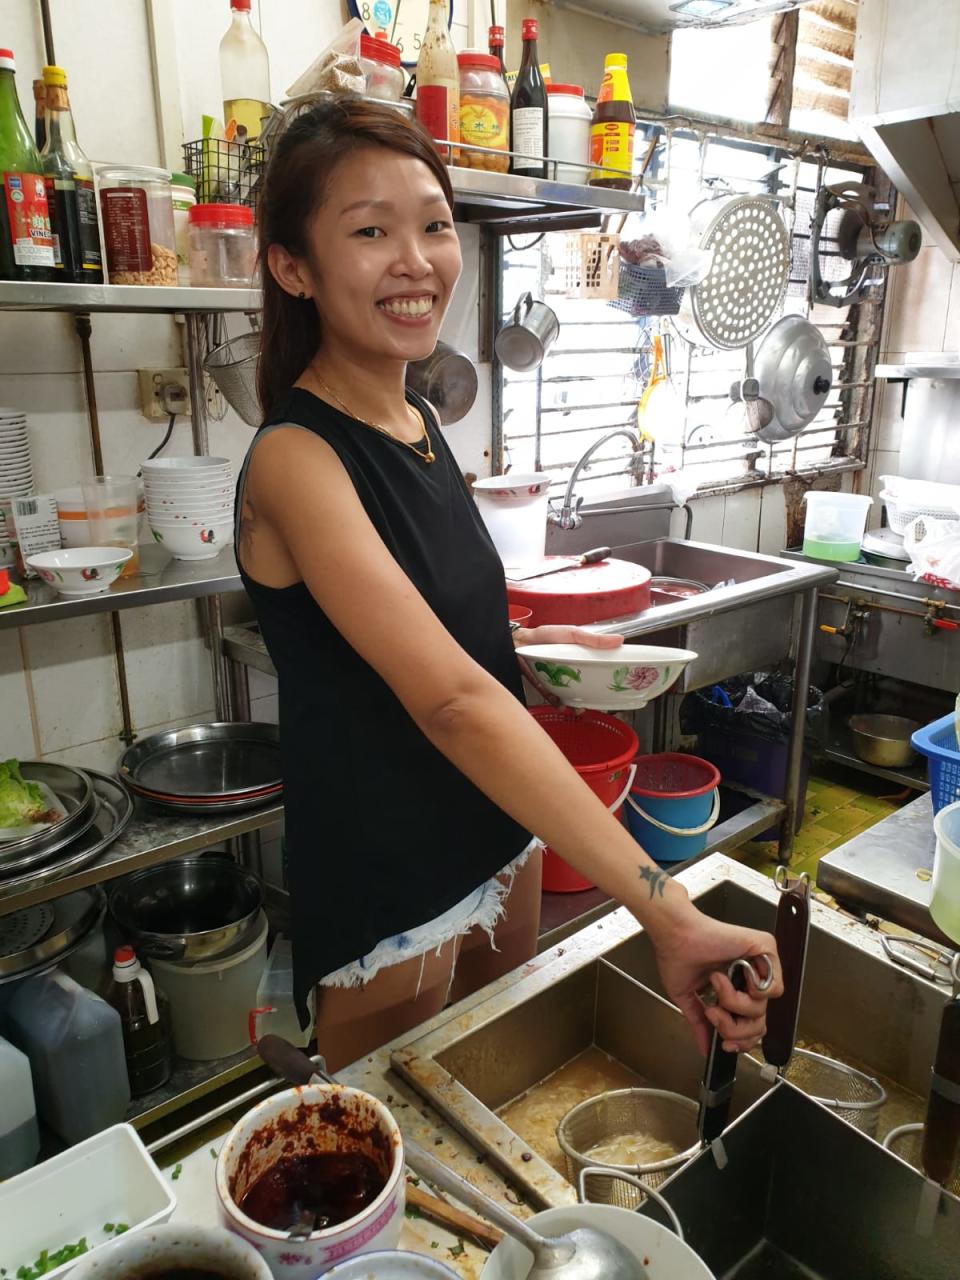 Jean from Ah Hua Teowchew Fishball Noodles (Photo: Ah Hua Teowchew Fishball Noodles)